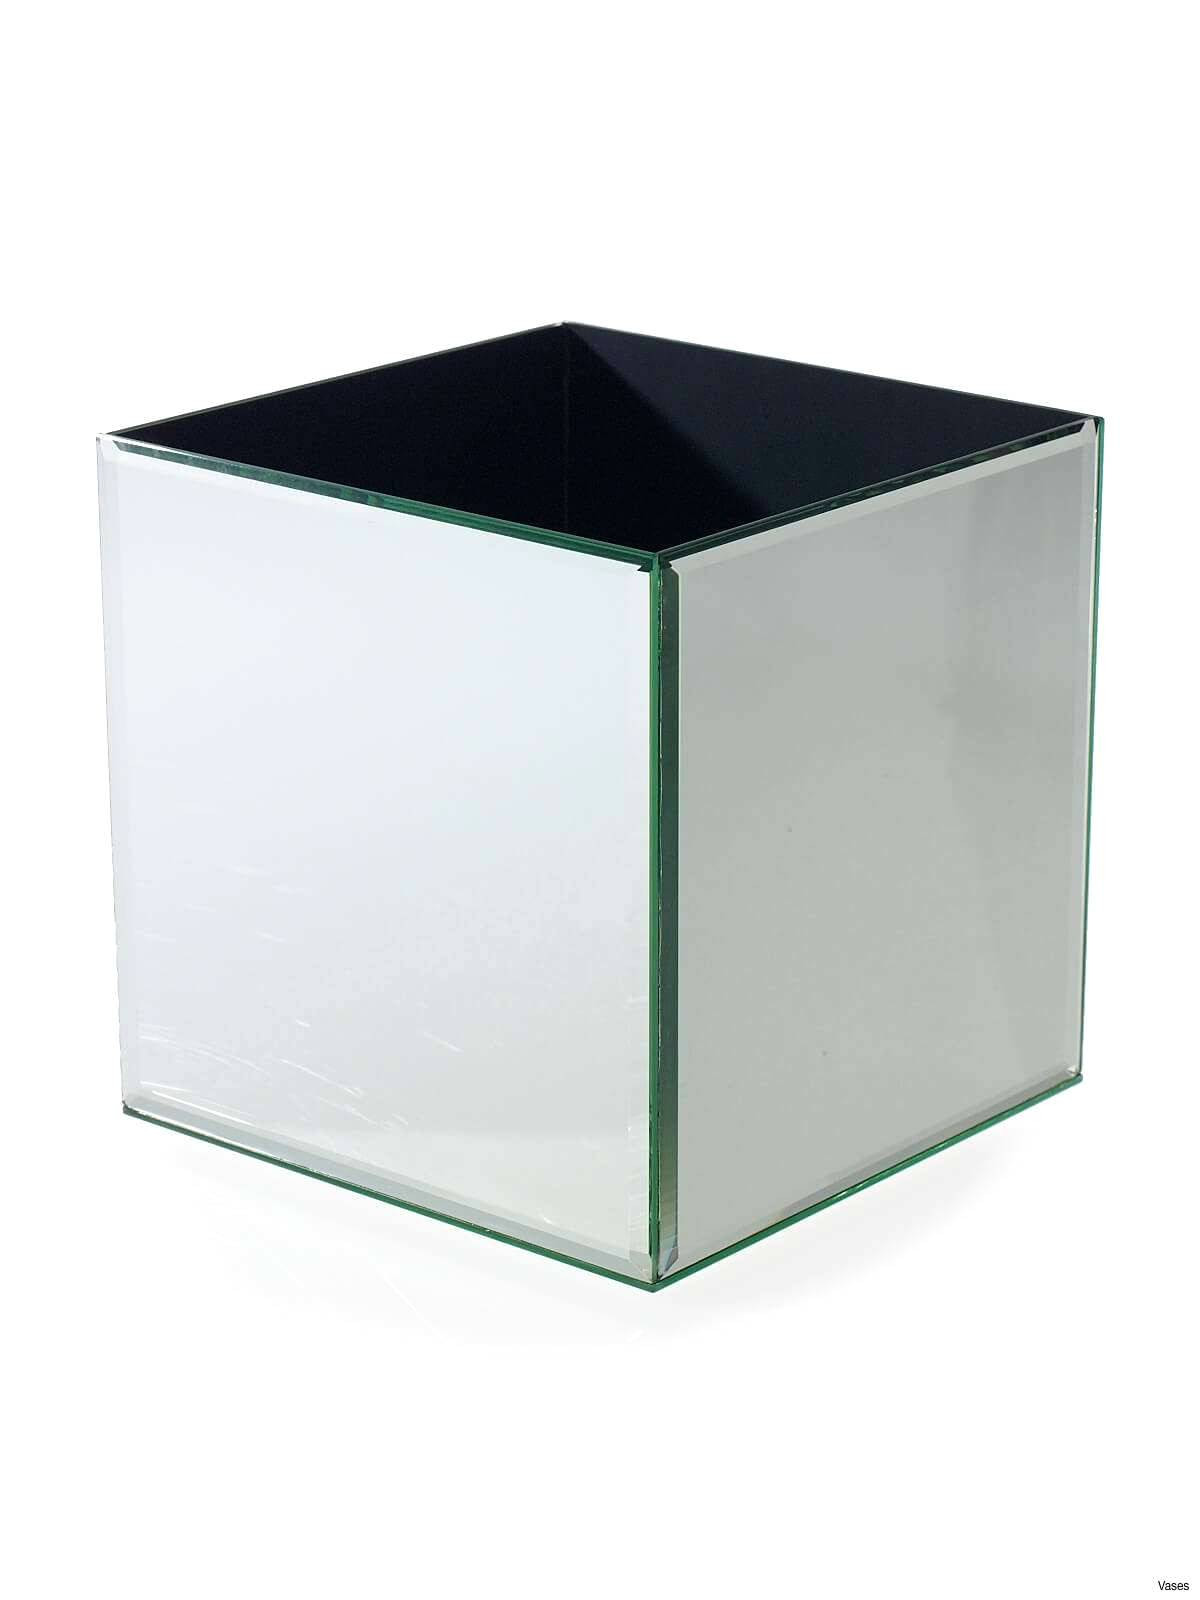 30 Ideal Square Glass Vases 2024 free download square glass vases of glass decorations for weddings elegant mirrored square vase 3h vases within glass decorations for weddings elegant mirrored square vase 3h vases mirror weddings table d